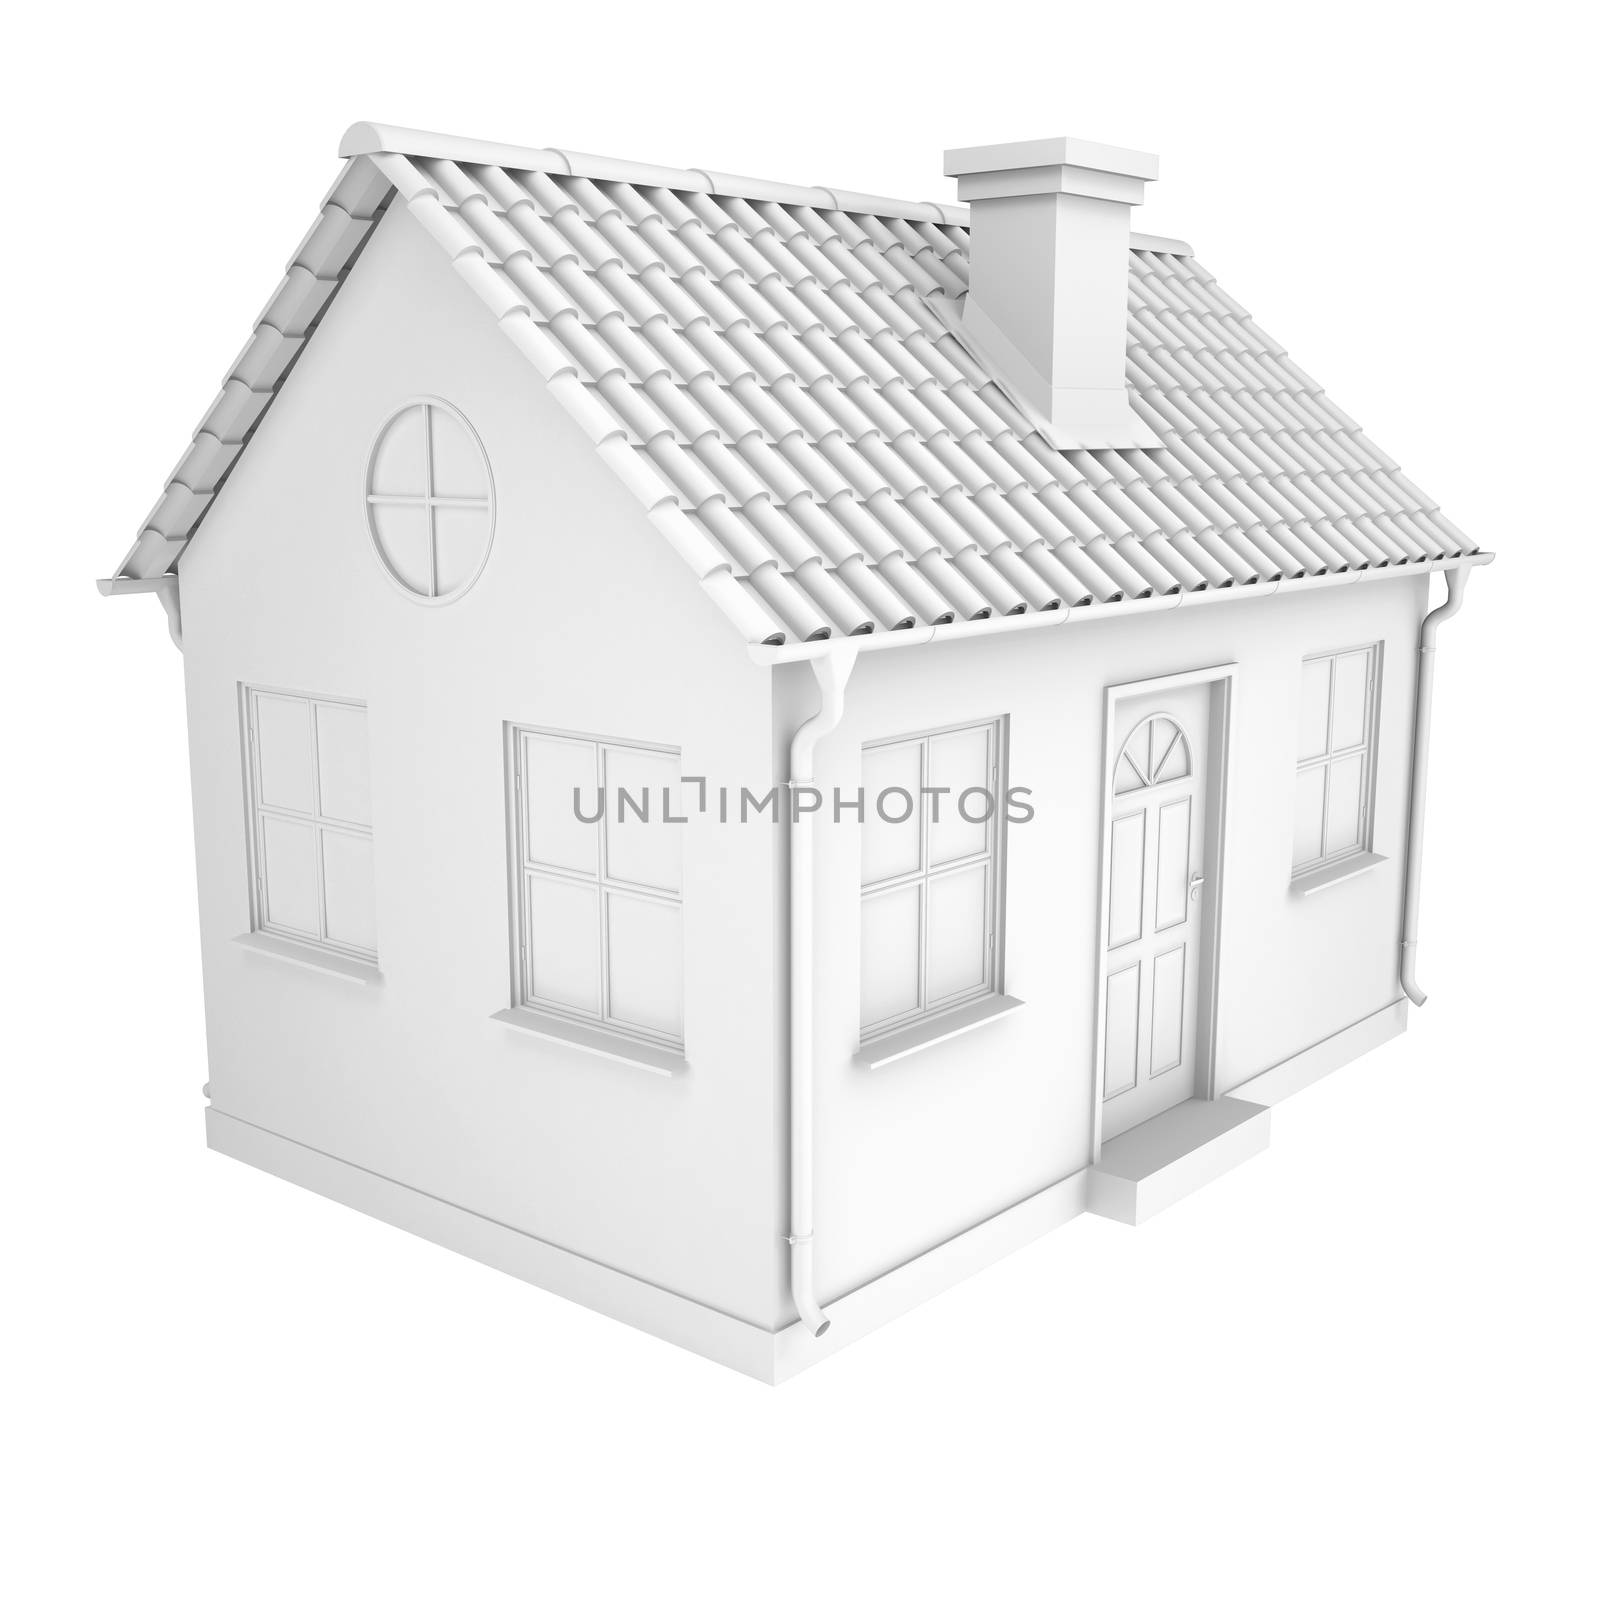 The little white house. Isolated render on a white background